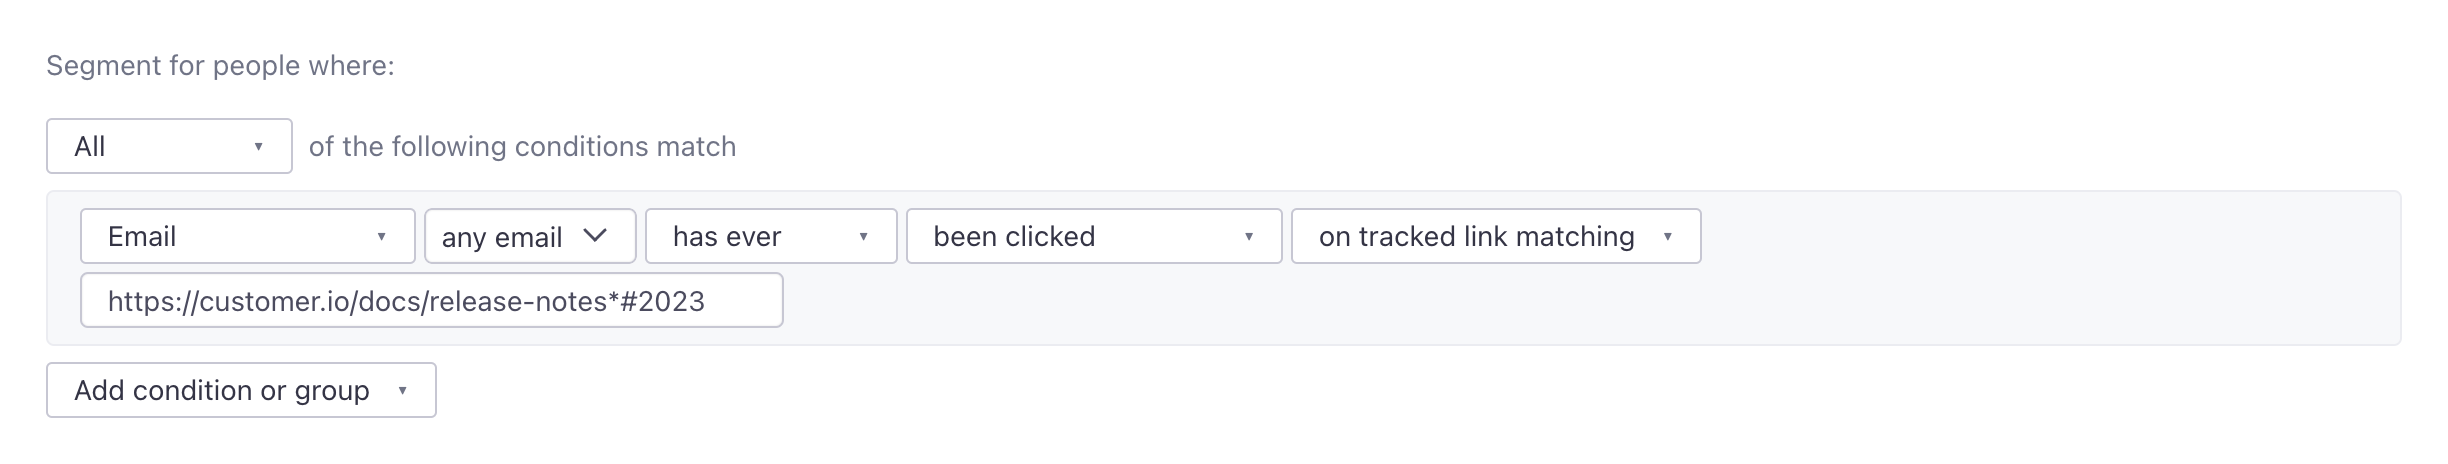 Email where any email has ever been clicked on tracked link matching https://customer.io/docs/release-notes*#2023